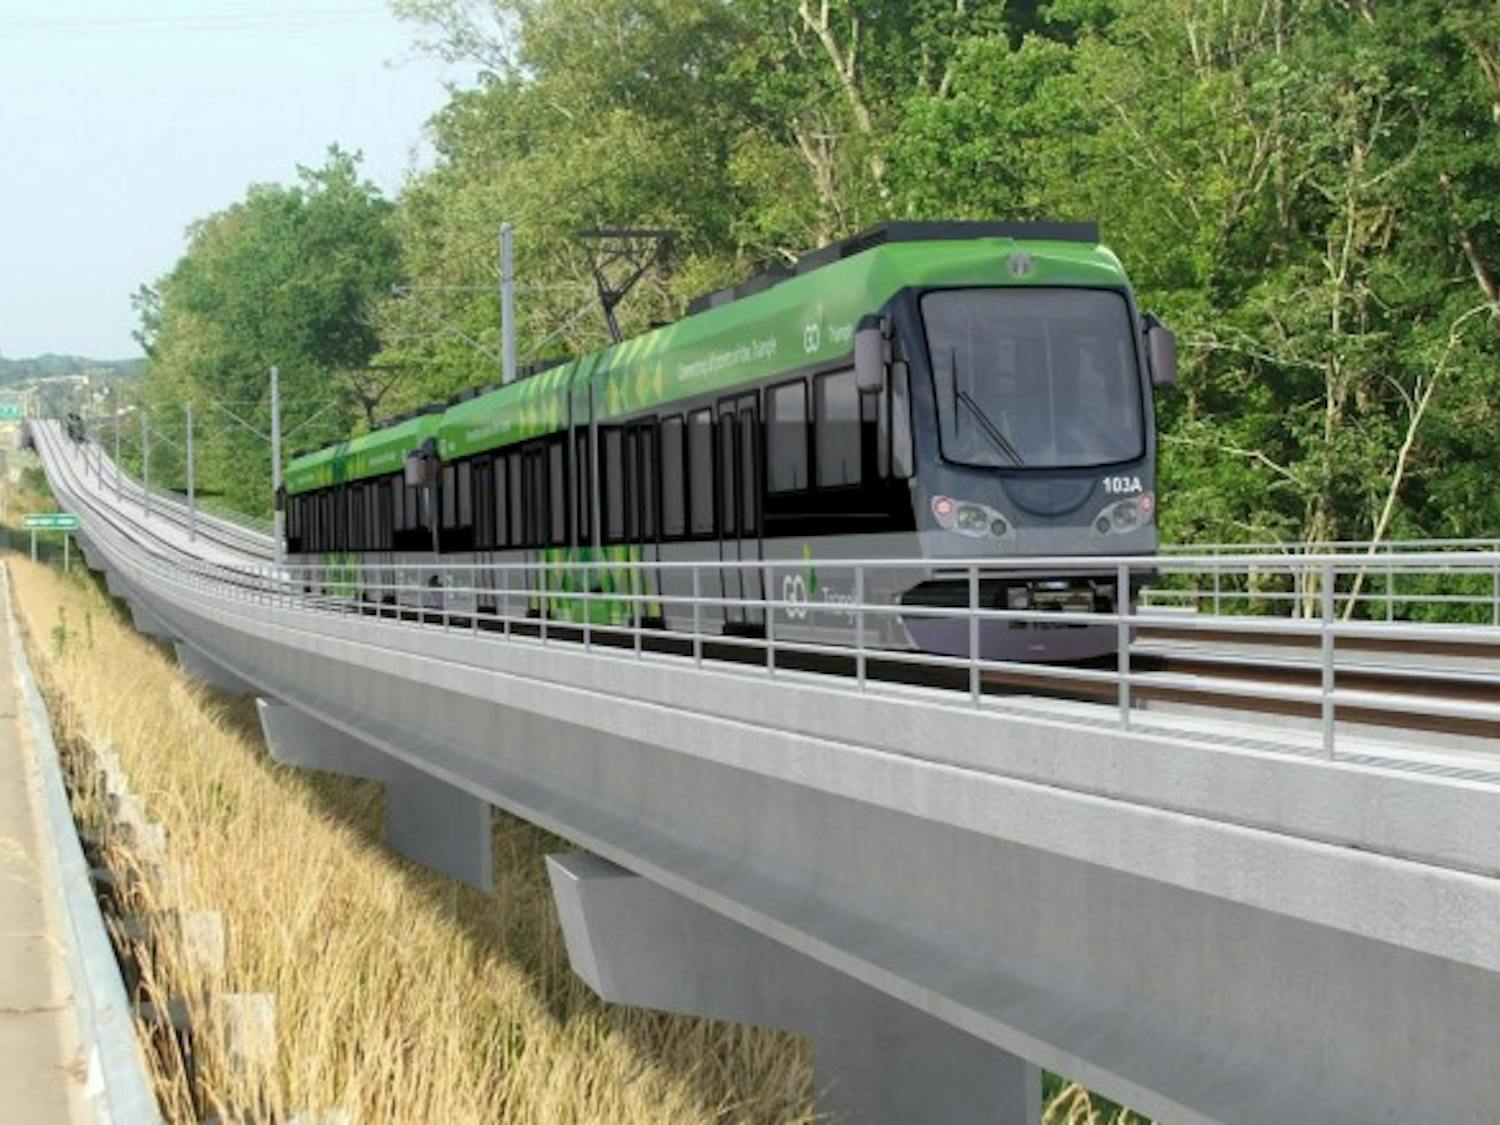 GoTriangle has designed mock-ups for a light rail between Durham and Chapel Hill paralleling 15-501. Graphic courtesy of GoTriangle.